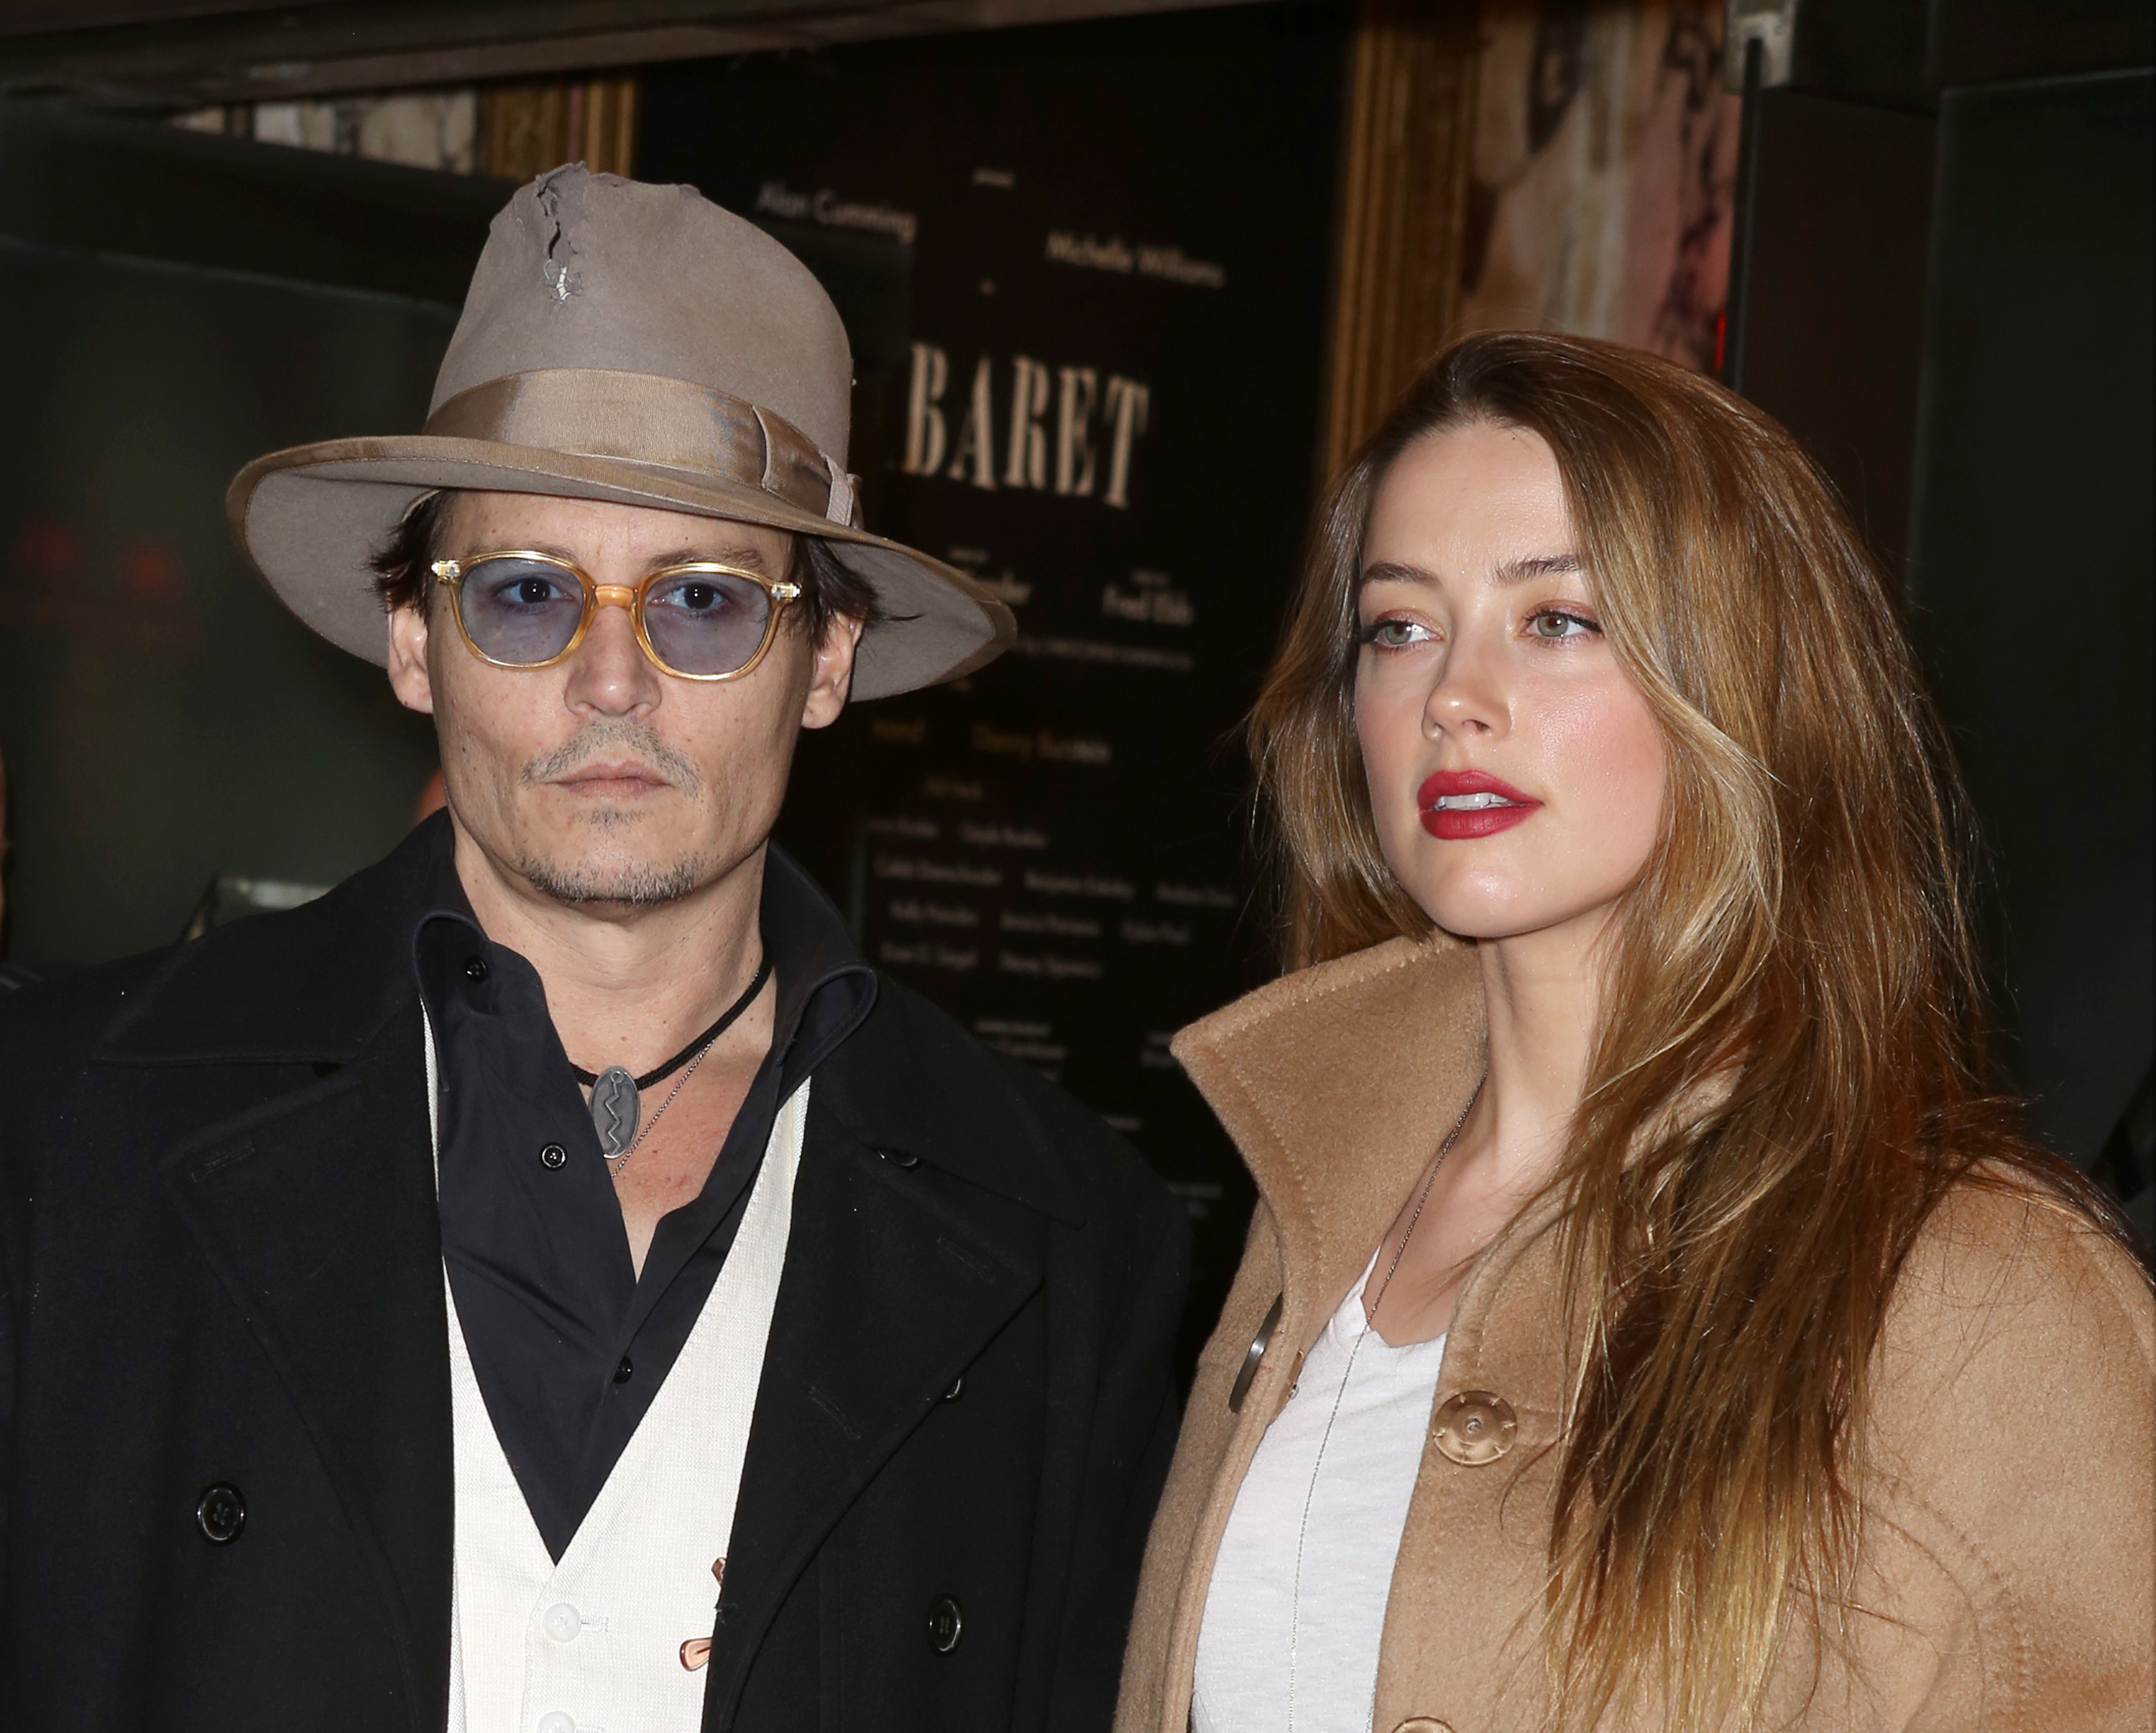 Johnny Depp and Amber Heard attending the Broadway Opening Night Performance of "Cabaret" on April 24, 2014, in New York City. | Source: Getty Images